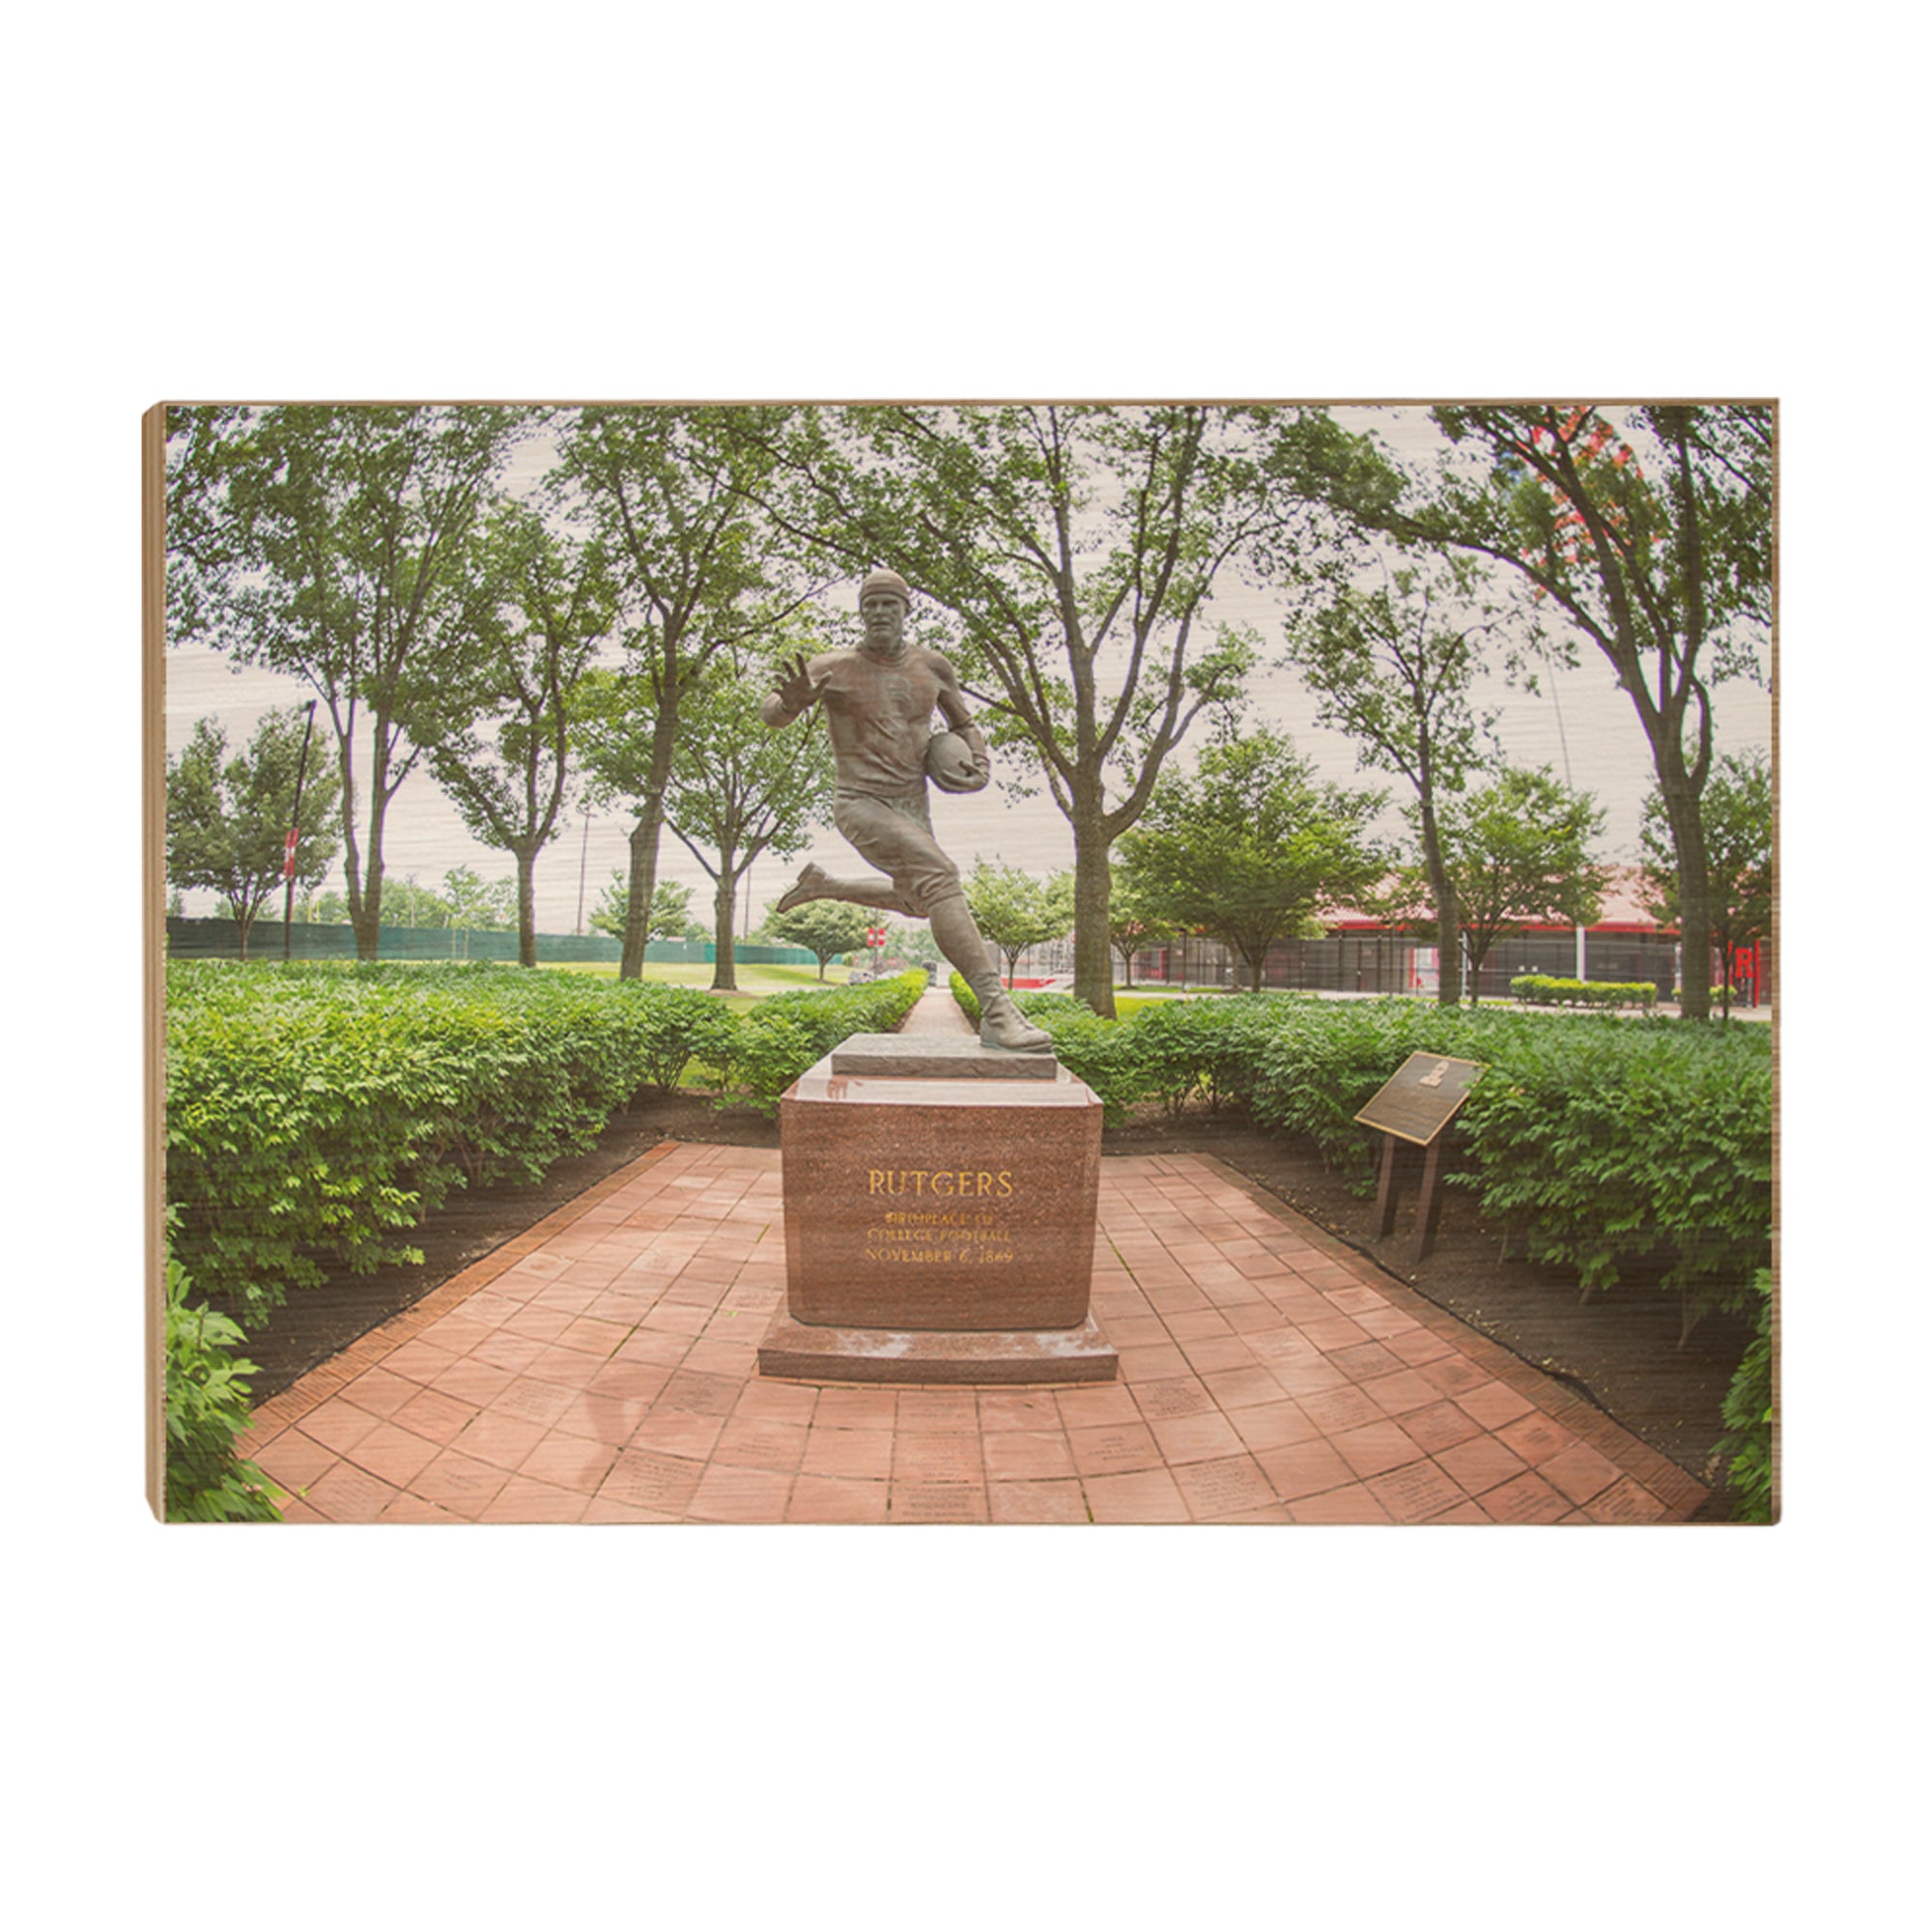 Rutgers Scarlet Knights - Birthplace Statue - College Wall Art #Canvas